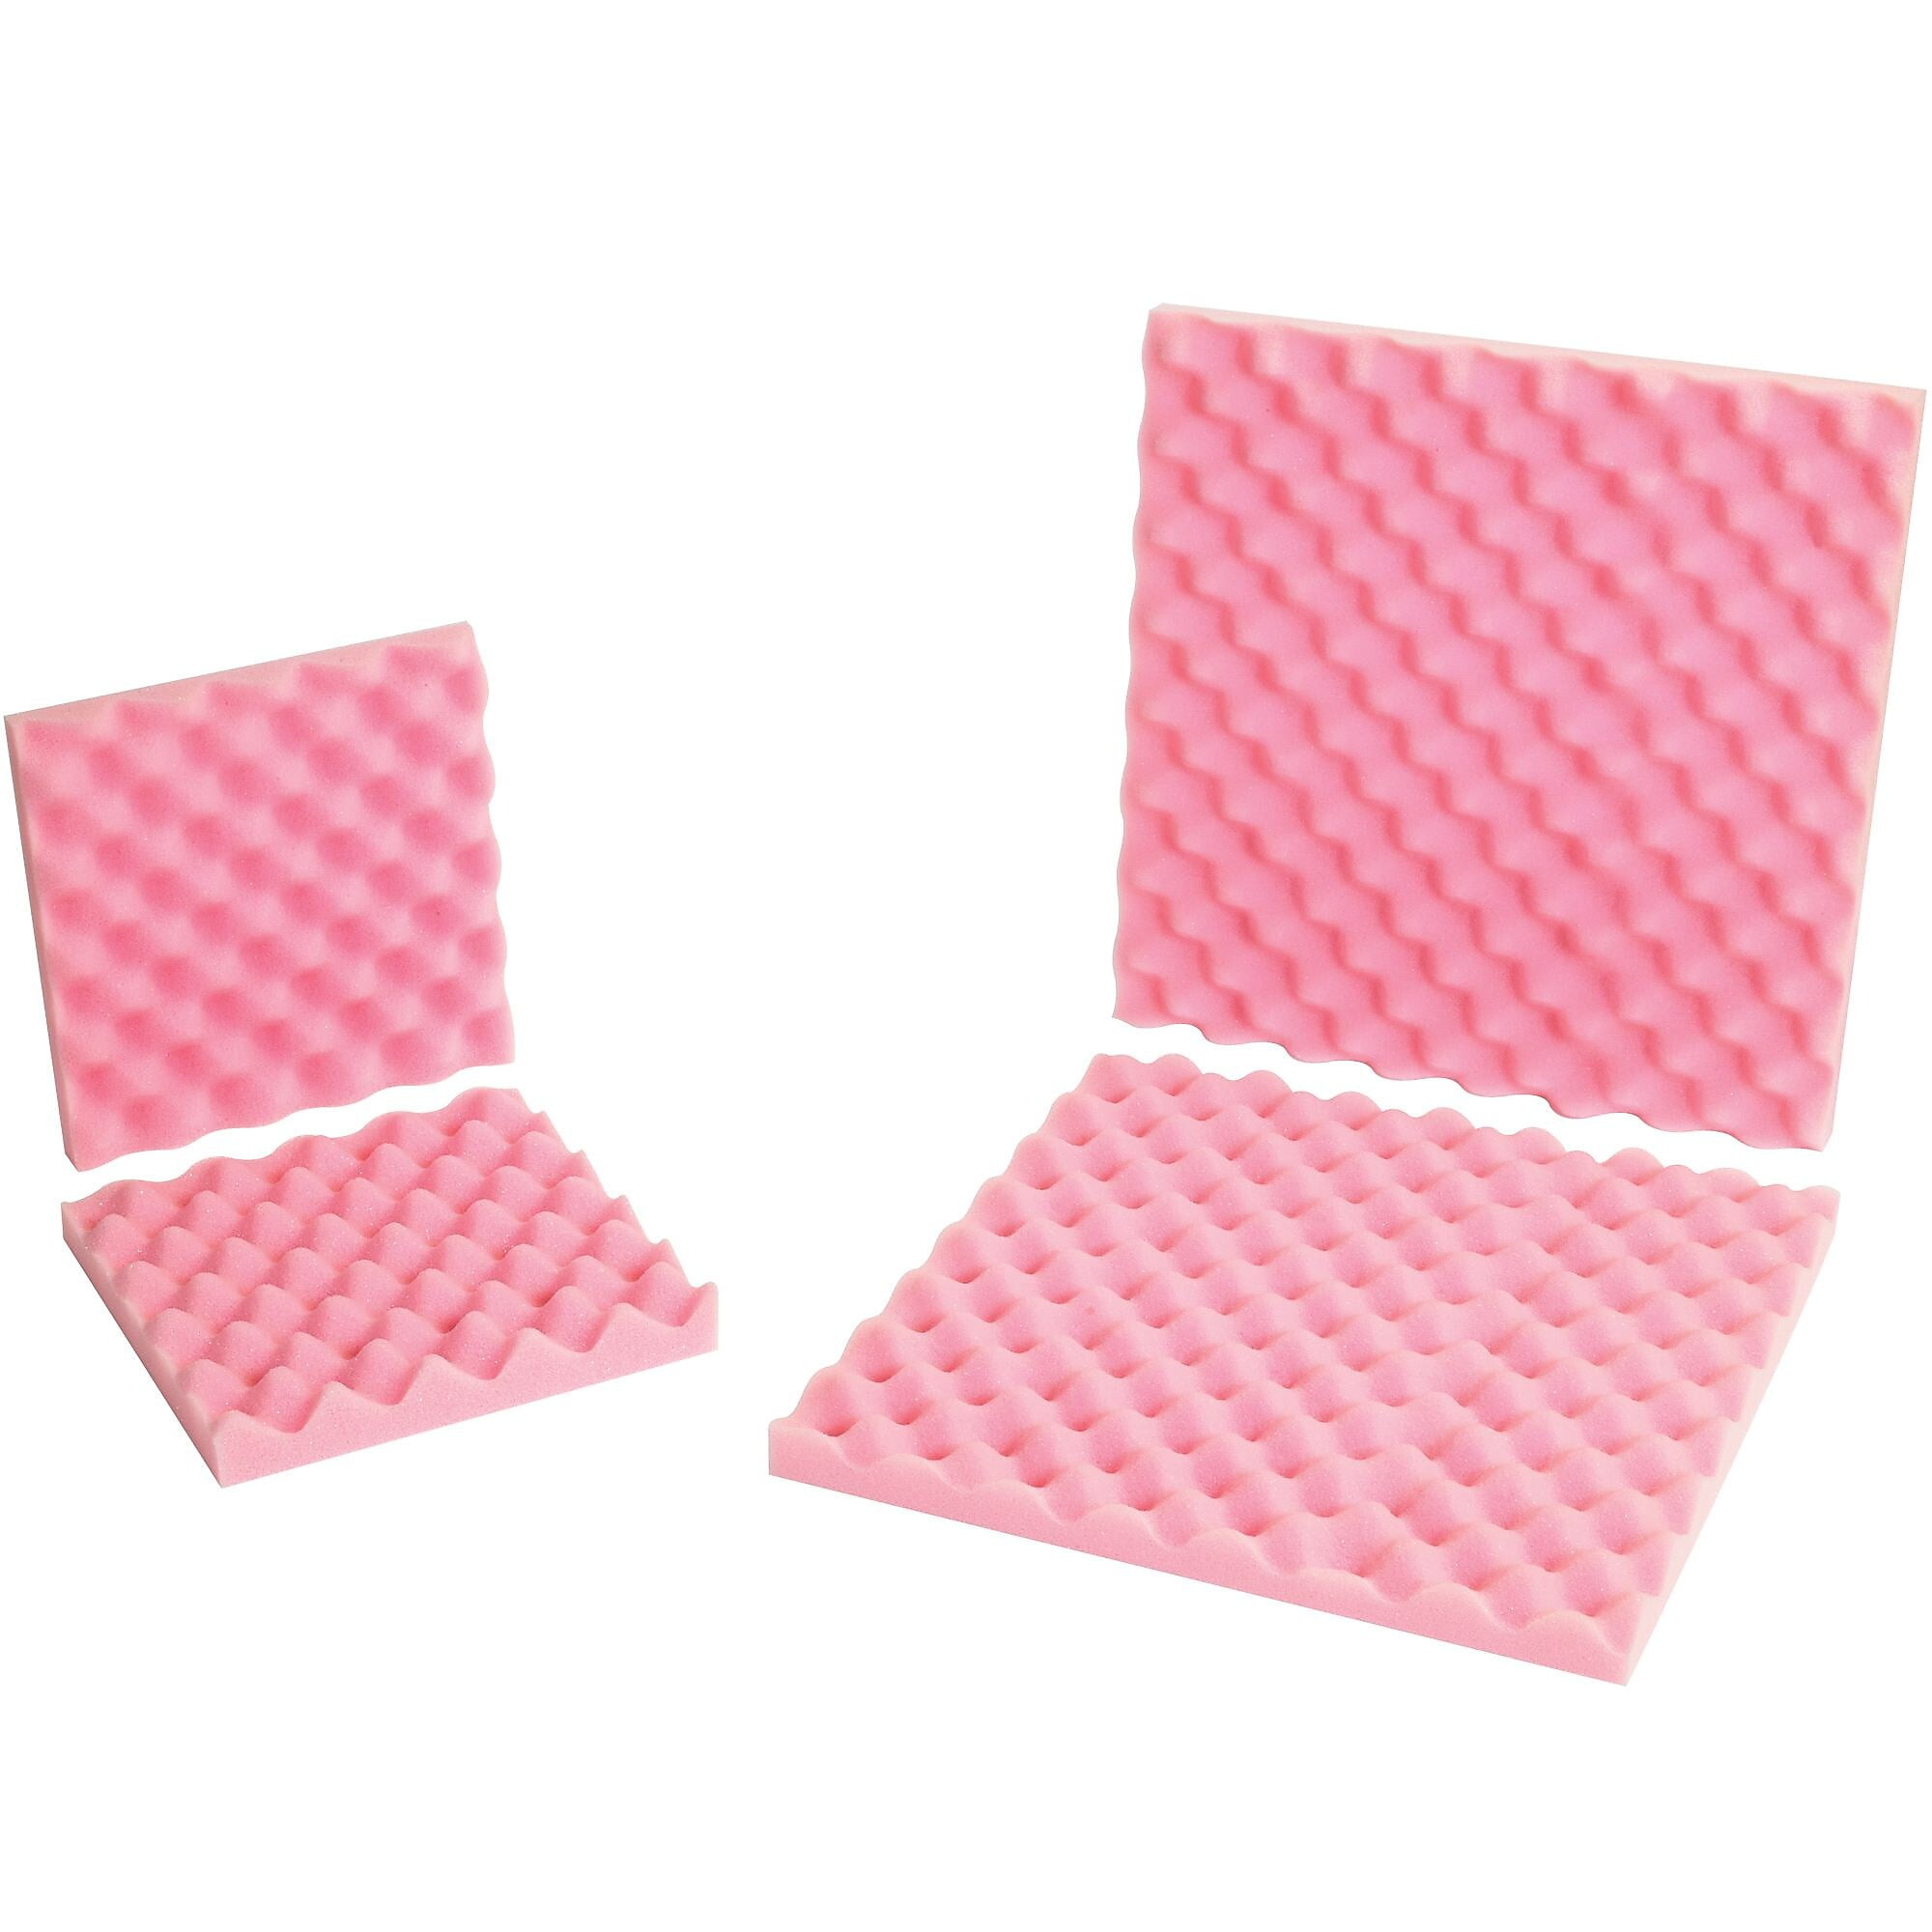 10 x 2, 10 Width Pack of 24 24 Sets Per Case 10 x 2 10 Width 2 Height 10 Length Box Partners Pink 10 Length Ship Now Supply SNFCSA10102 Anti-Static Convoluted Foam Sets 2 Height 